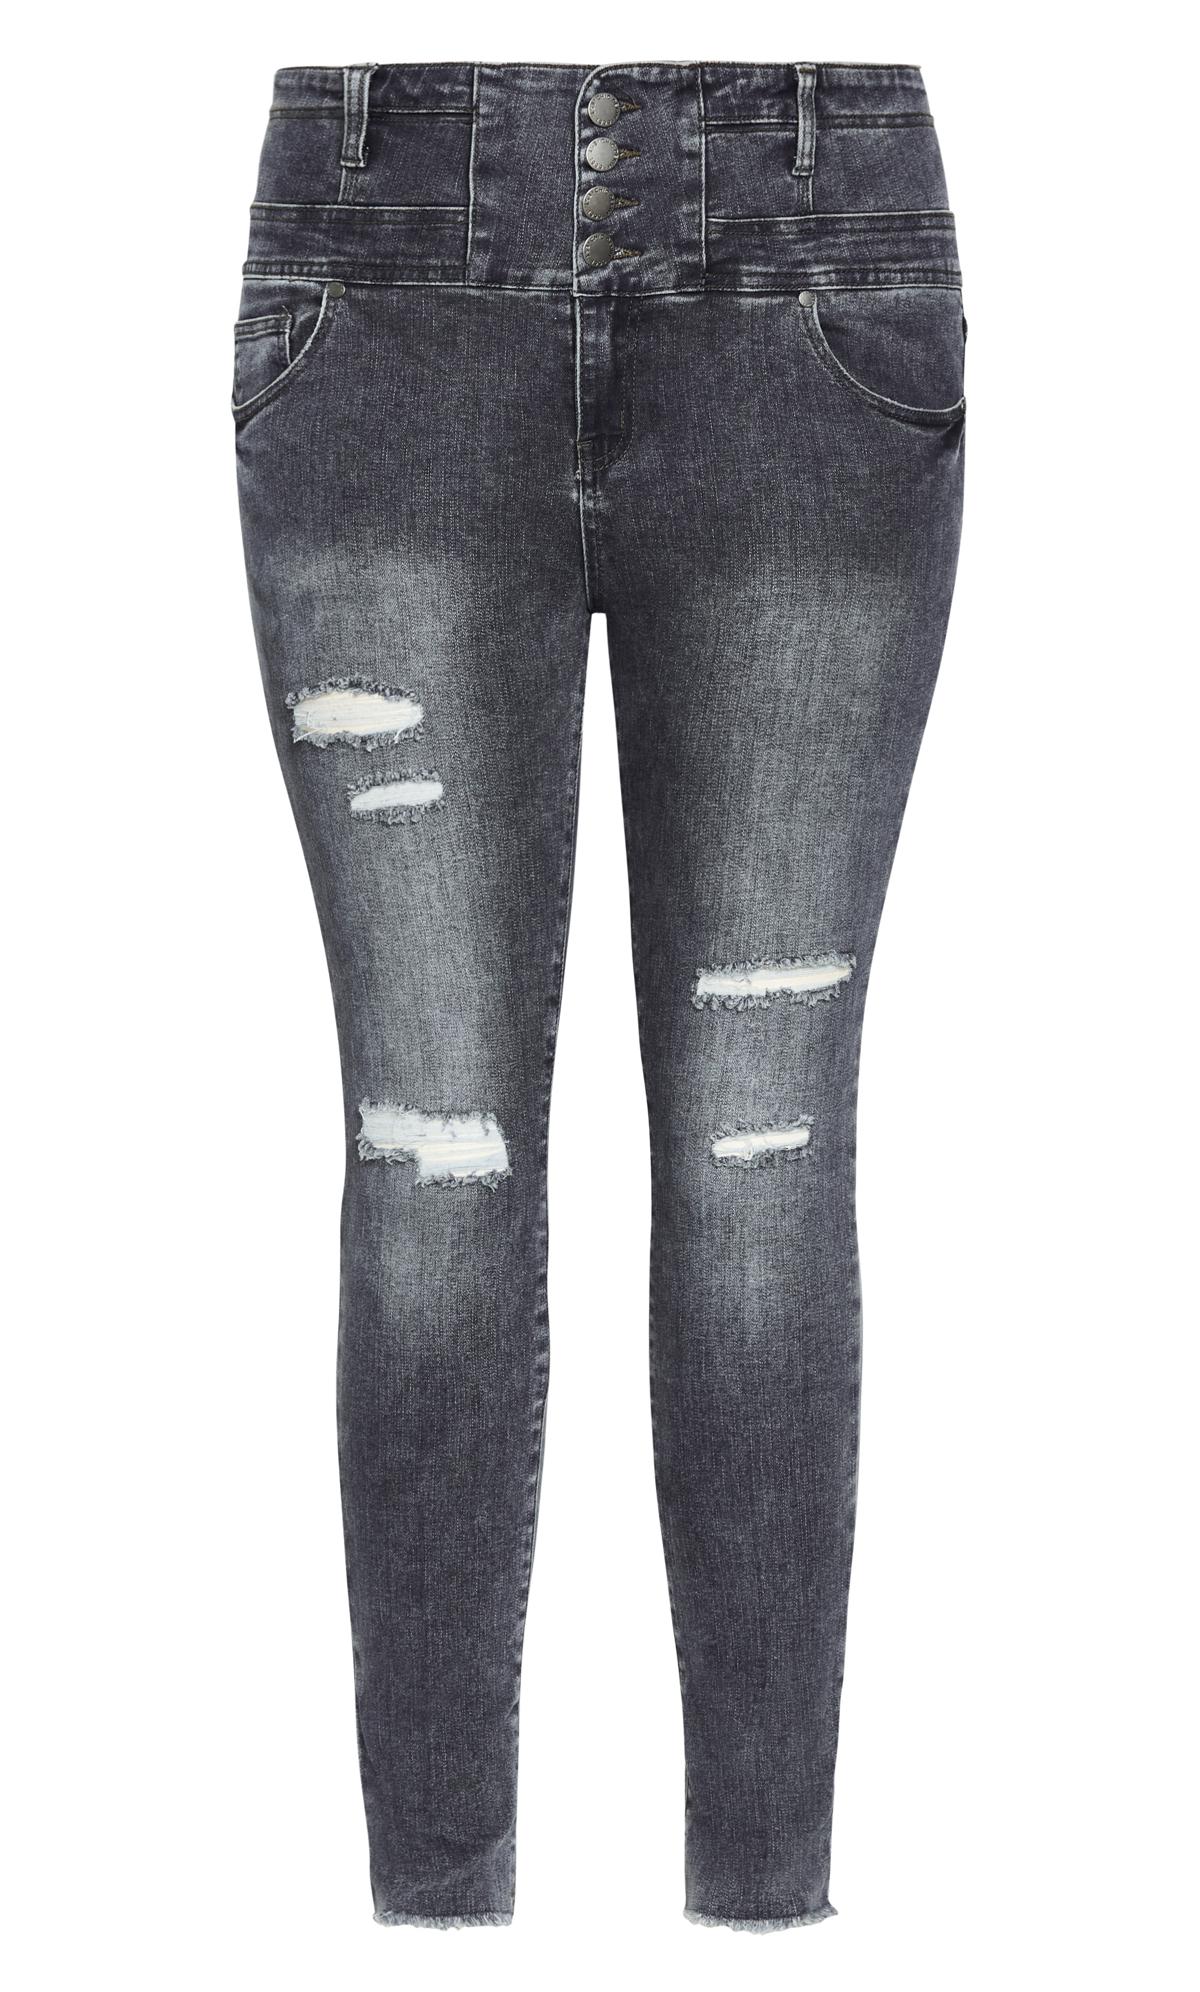 Asos Collection Rivington High Waist Denim Jegging In Shadow Gray With  Ripped Knee, $54, Asos